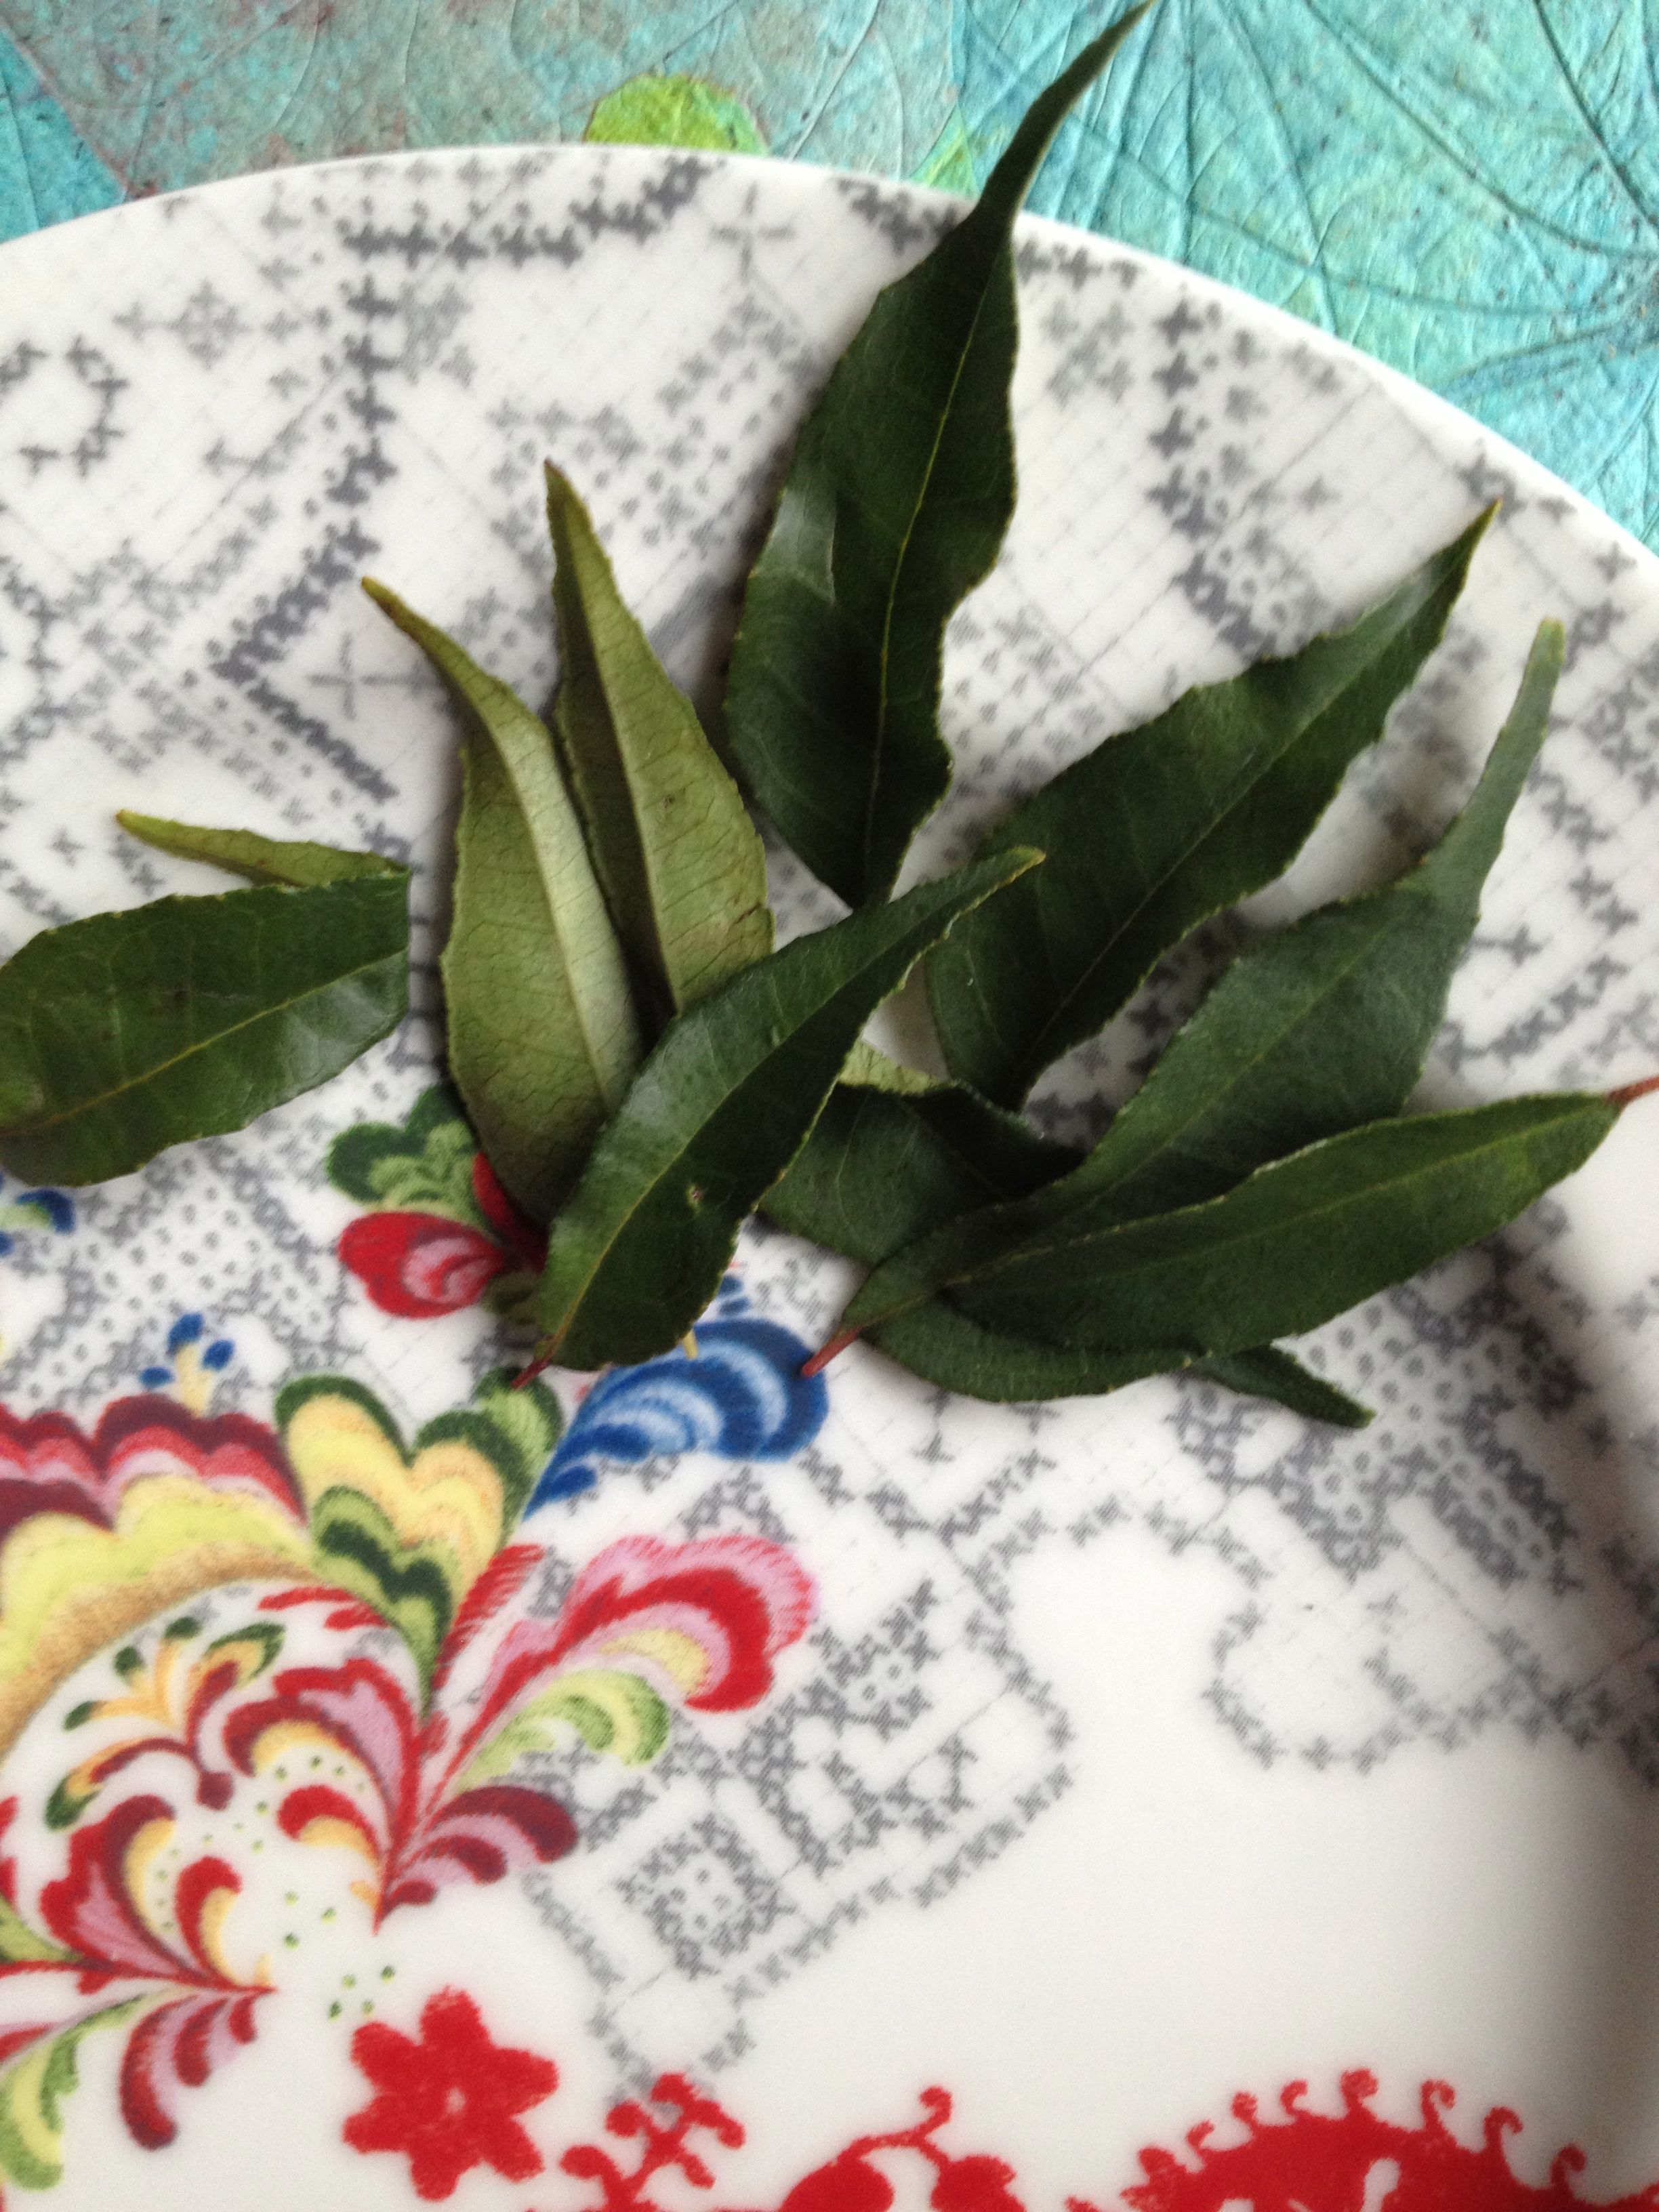 Greens 101: Charismatic Curry Leaves